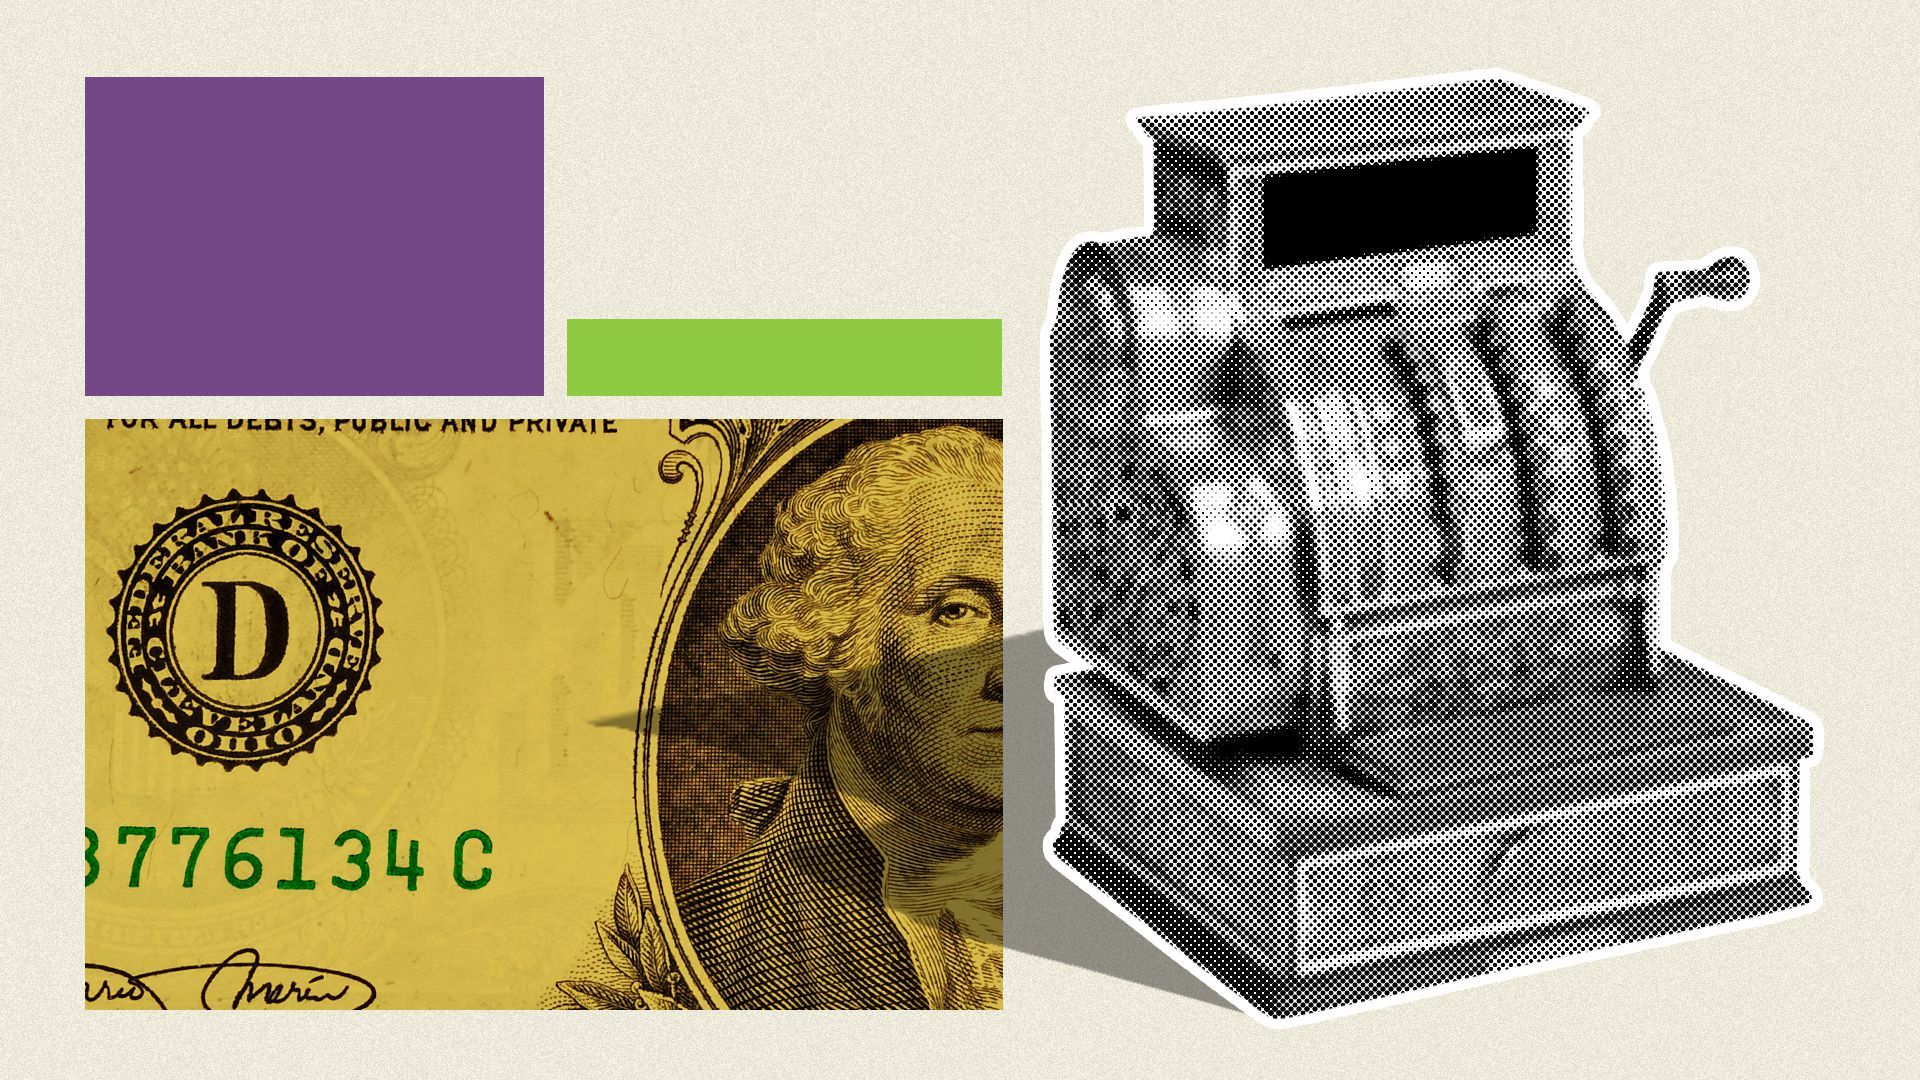 Illustration of a one dollar bill, some shapes, and a cash register in a collage style.